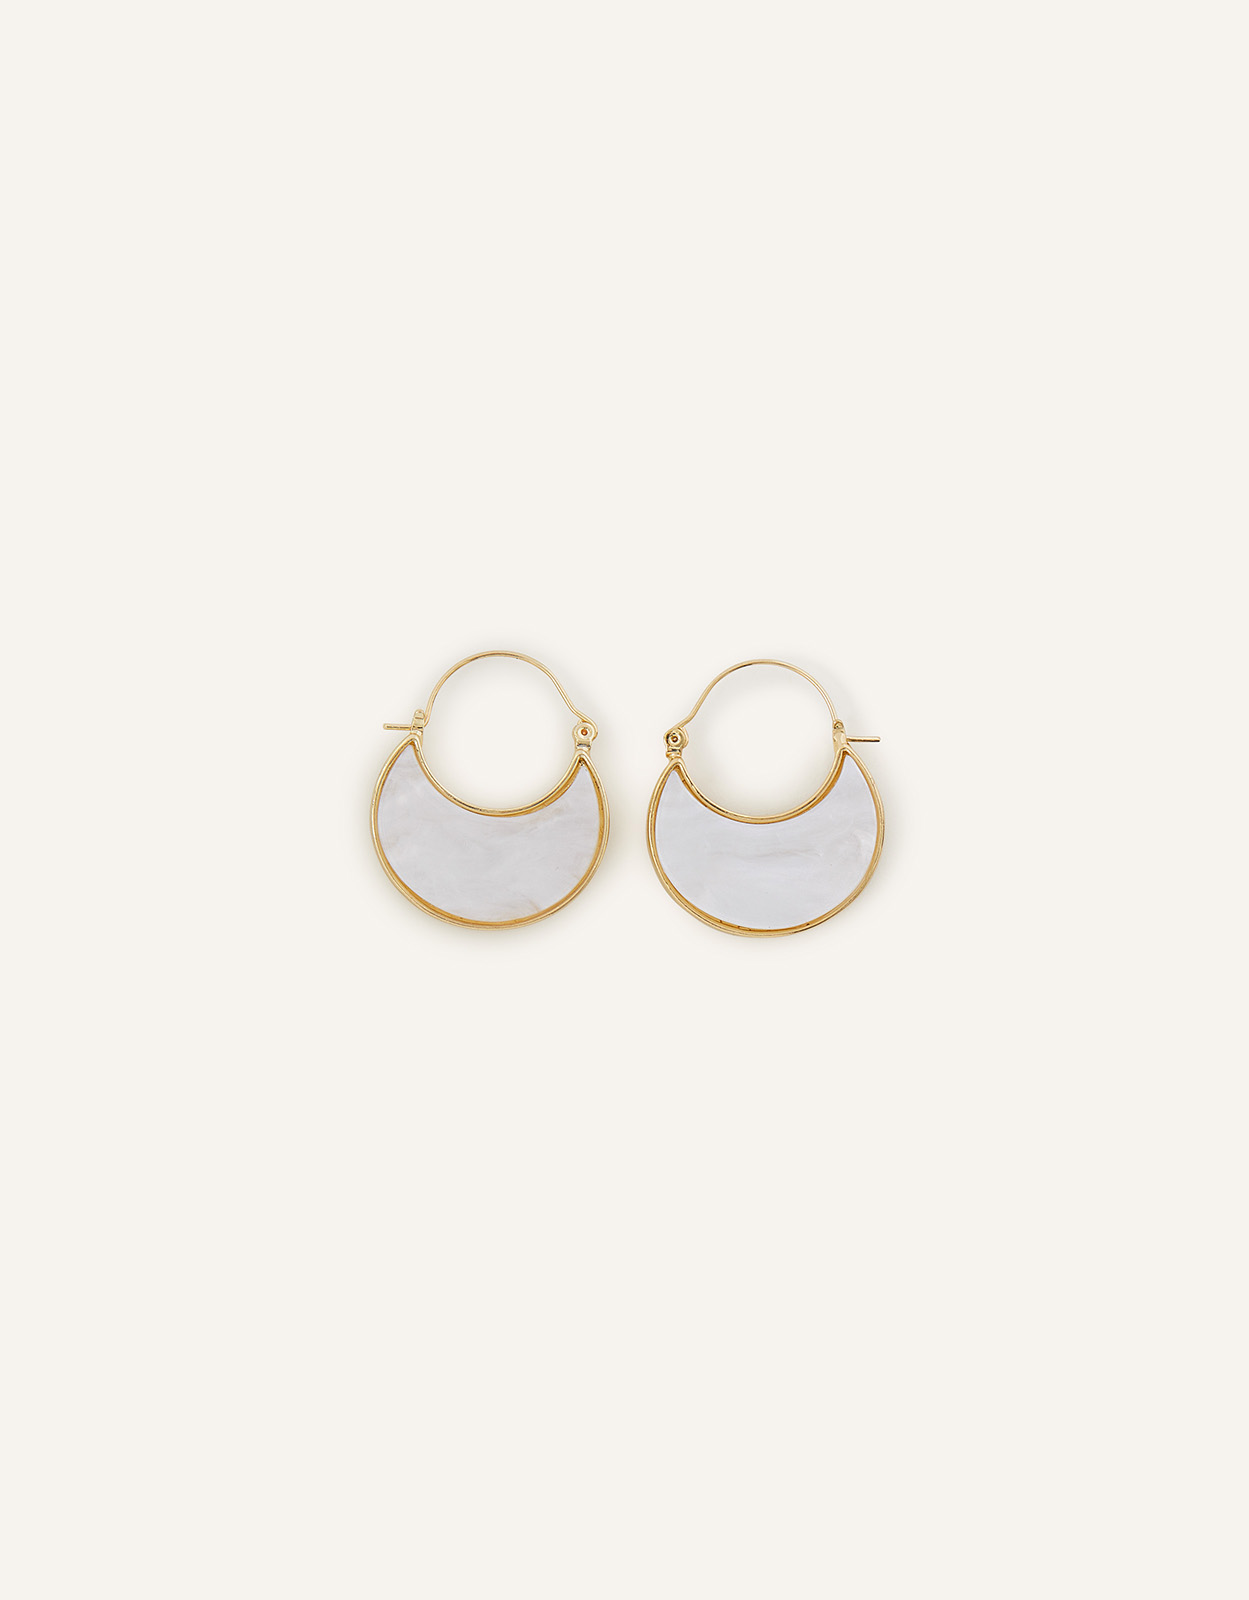 Accessorize Women's Gold and White Half Moon Drop Earrings, Size: 4cm